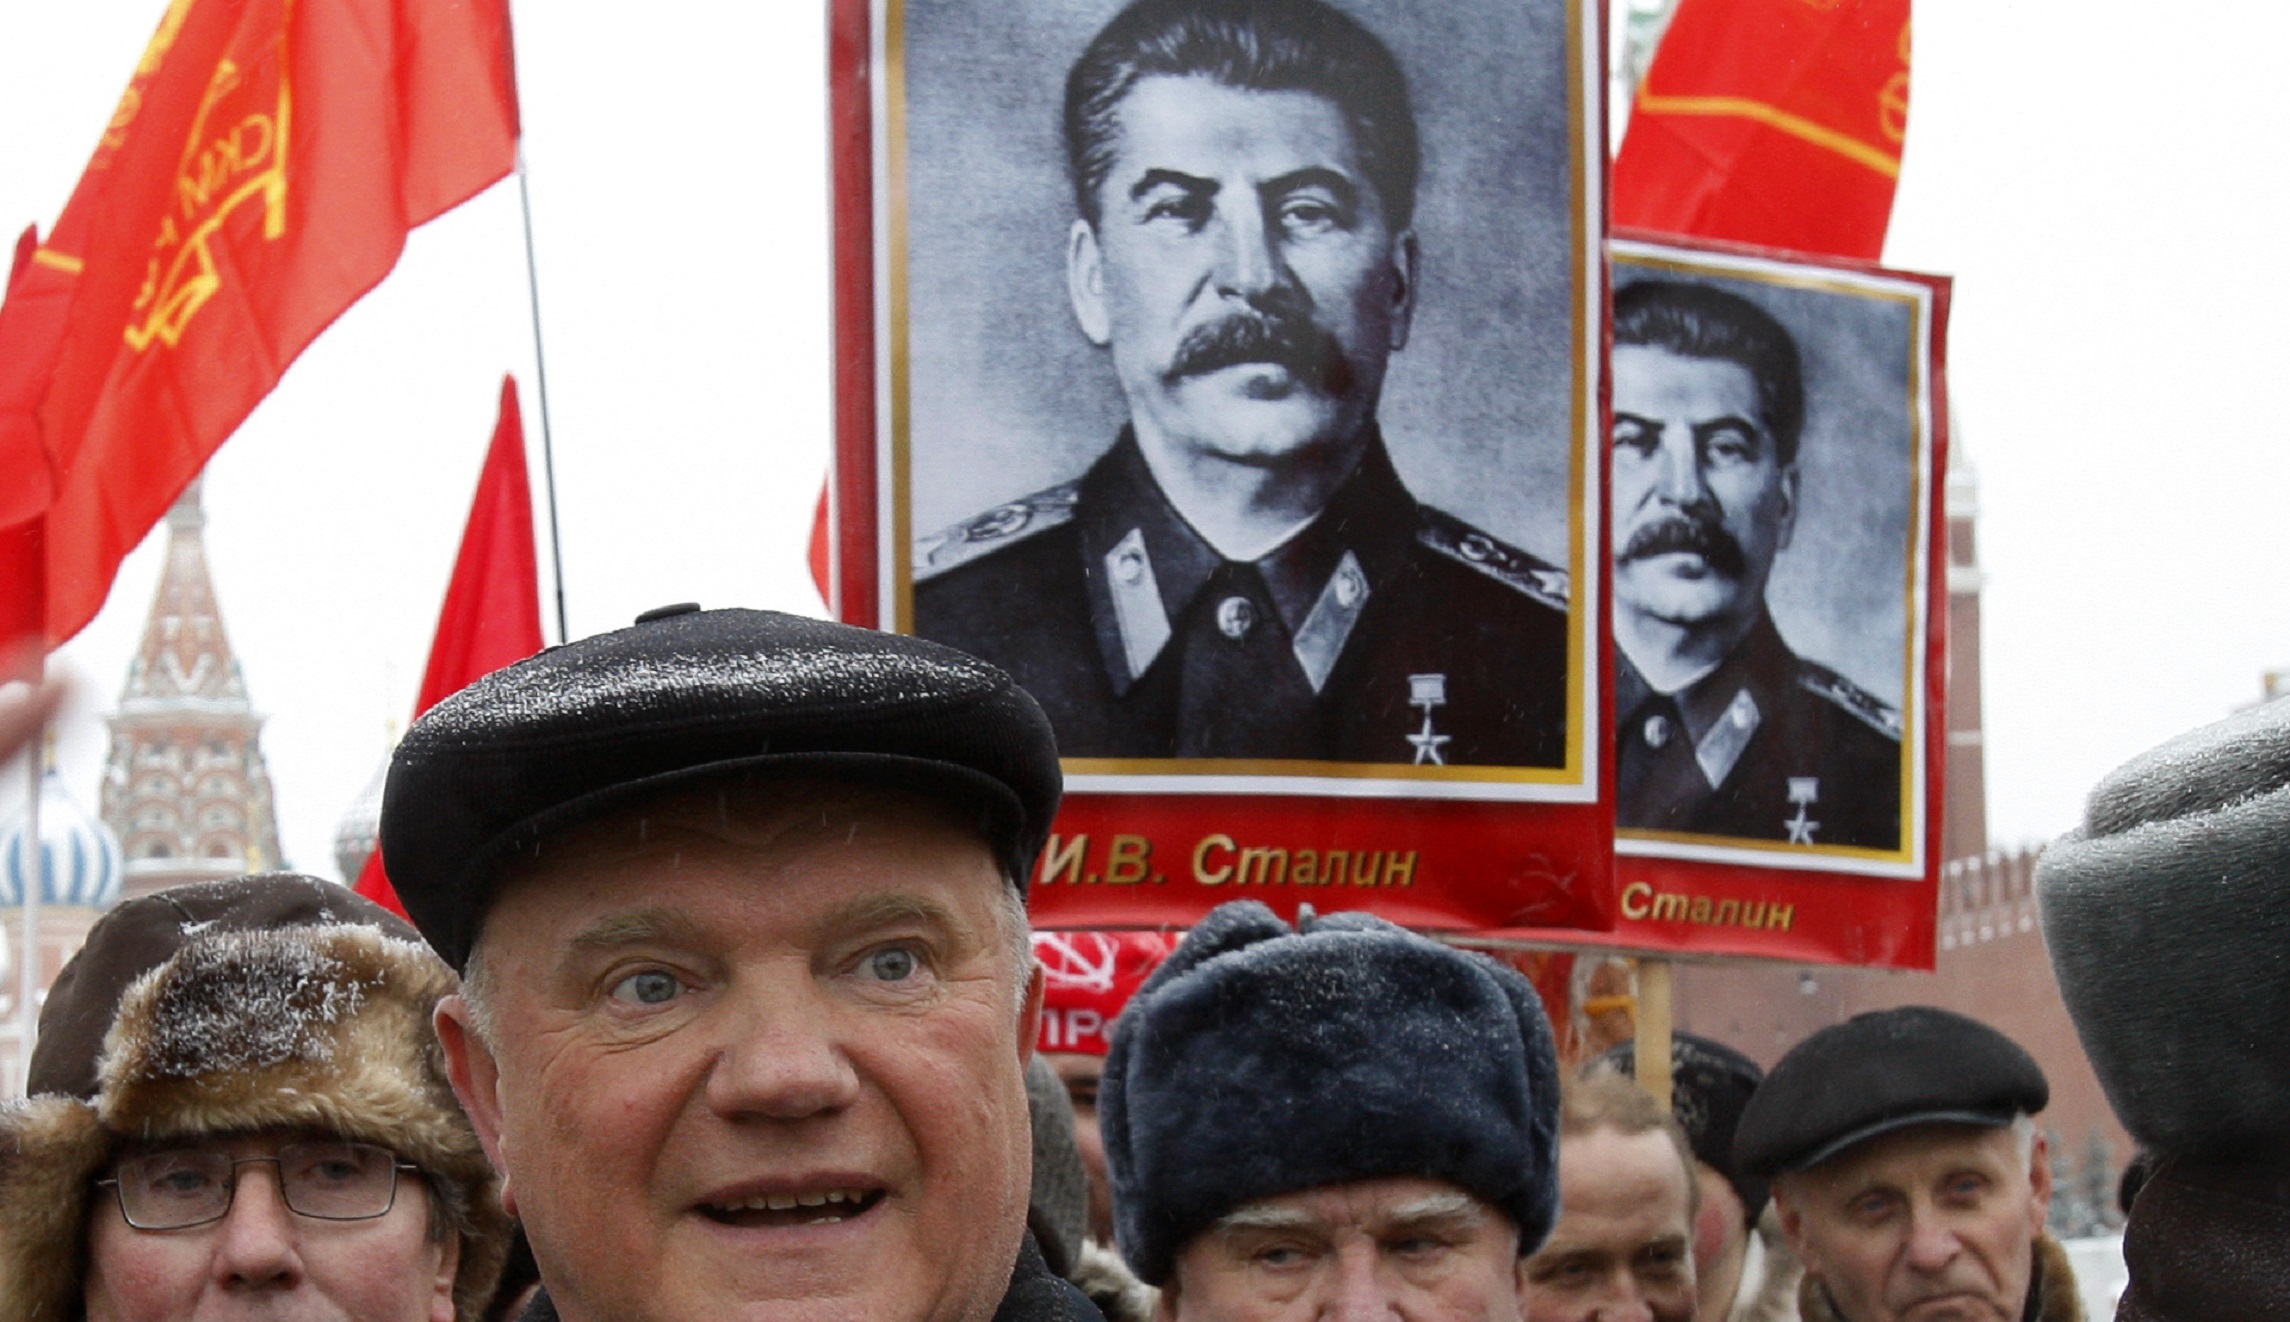 The forgotten lessons of Stalinism - Washington Examiner